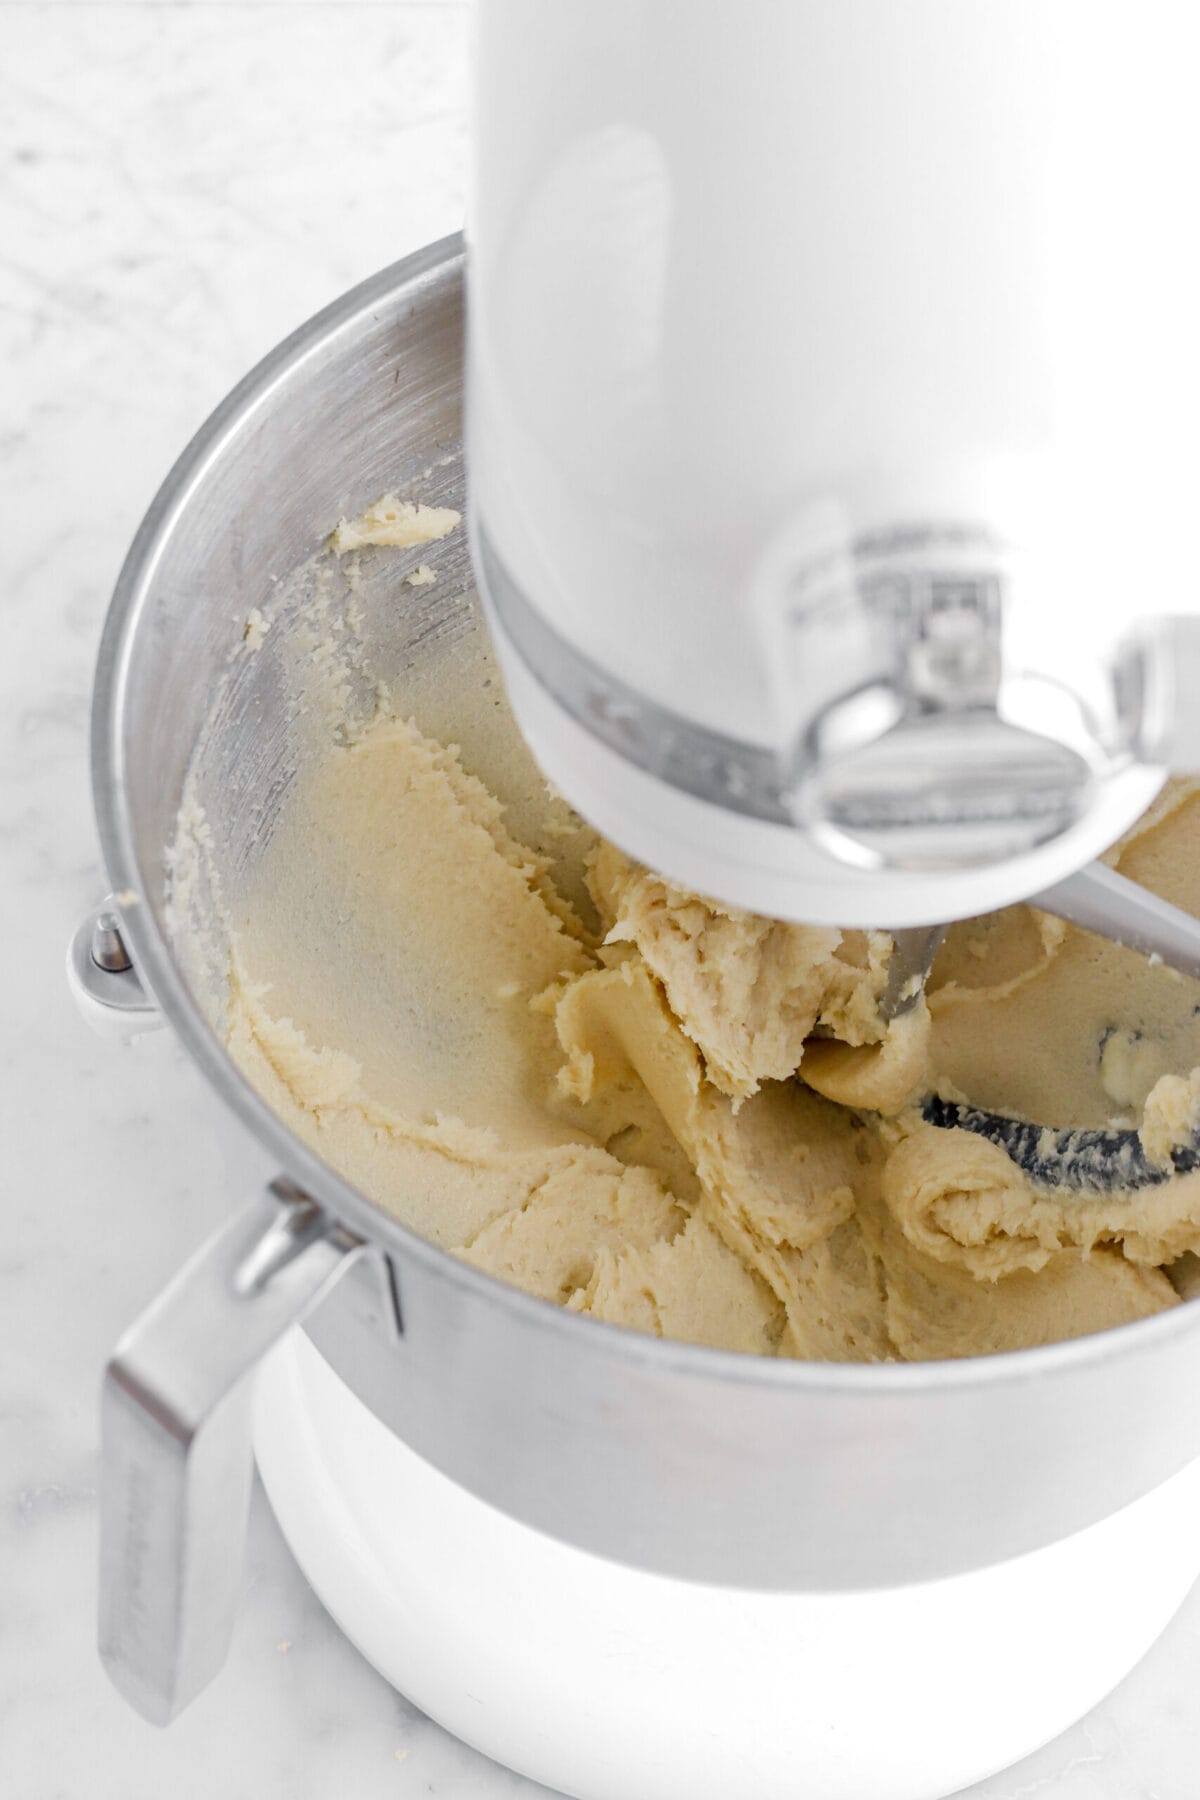 sugars and butter mixed in stand mixer.